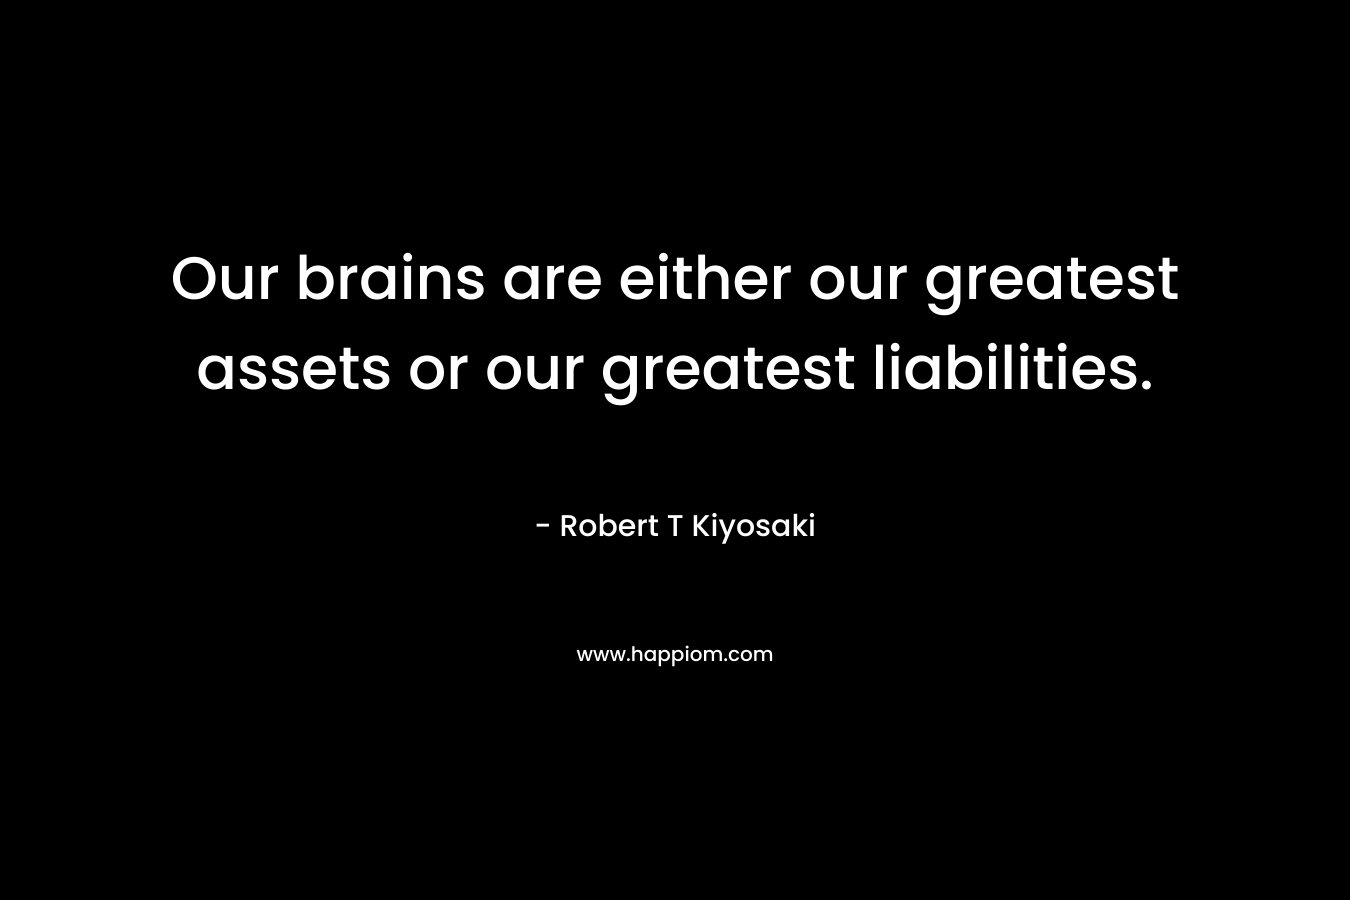 Our brains are either our greatest assets or our greatest liabilities. – Robert T Kiyosaki